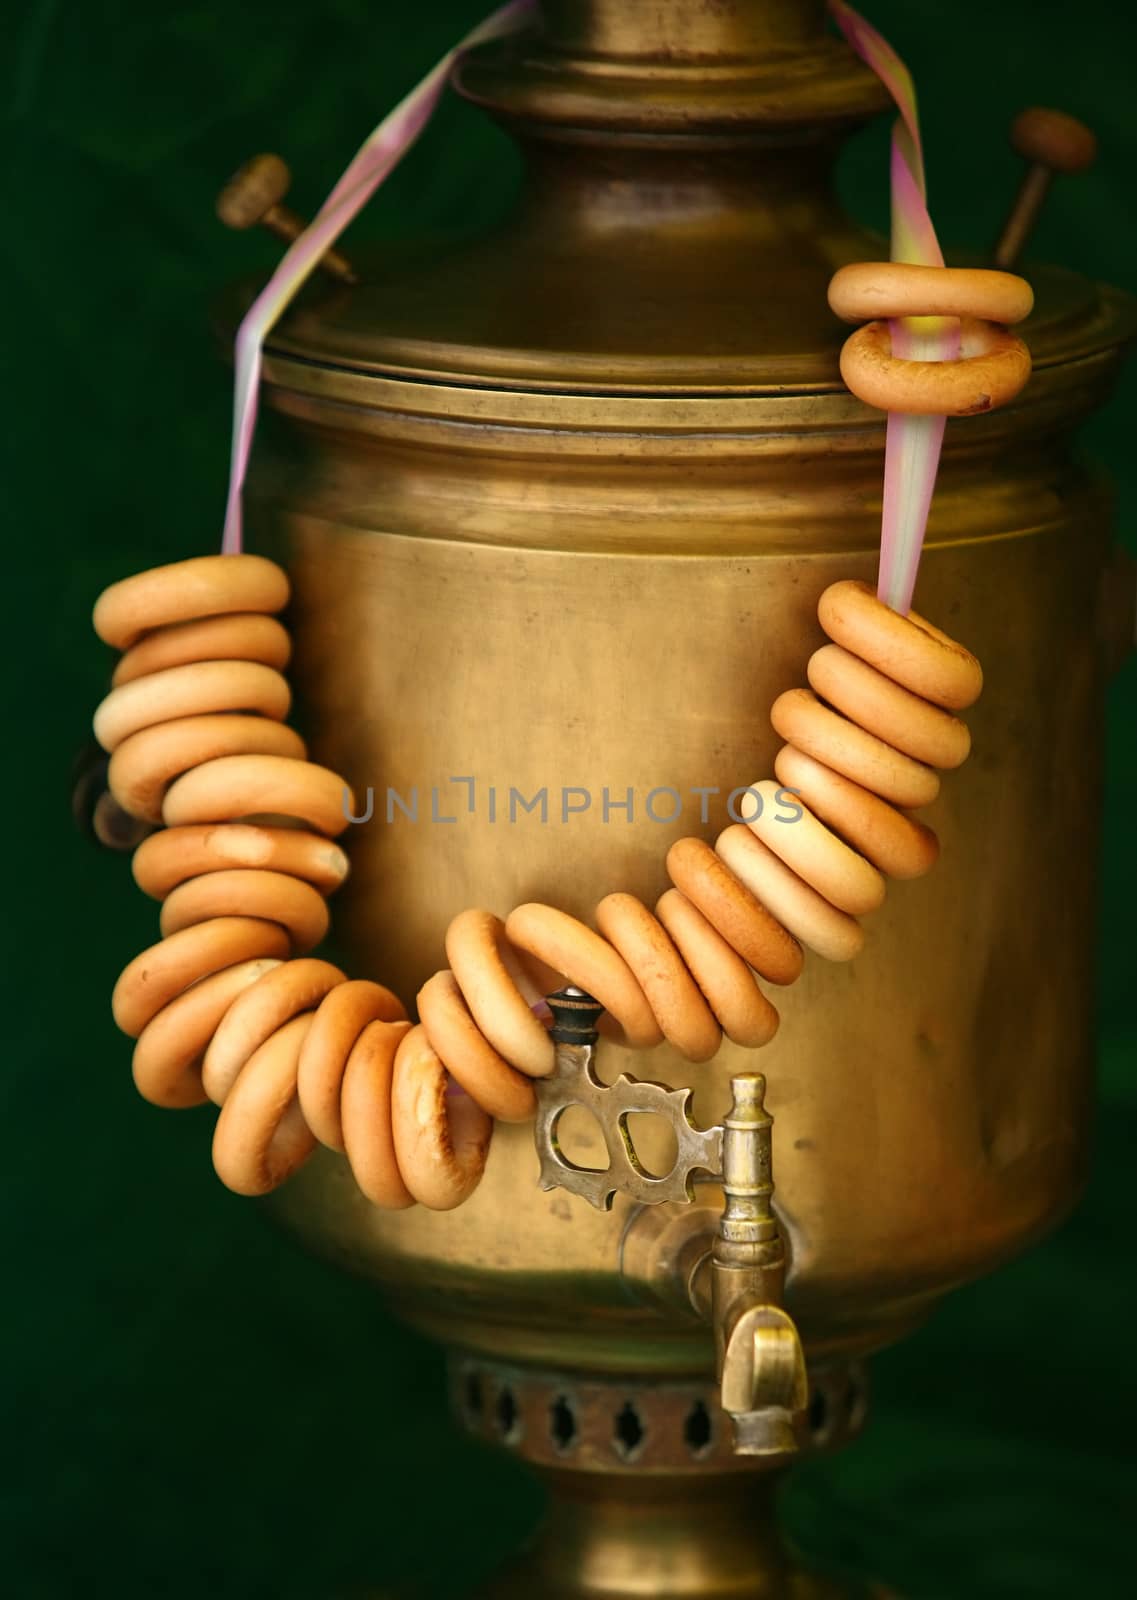 Pretzels on a cord and an old samovar